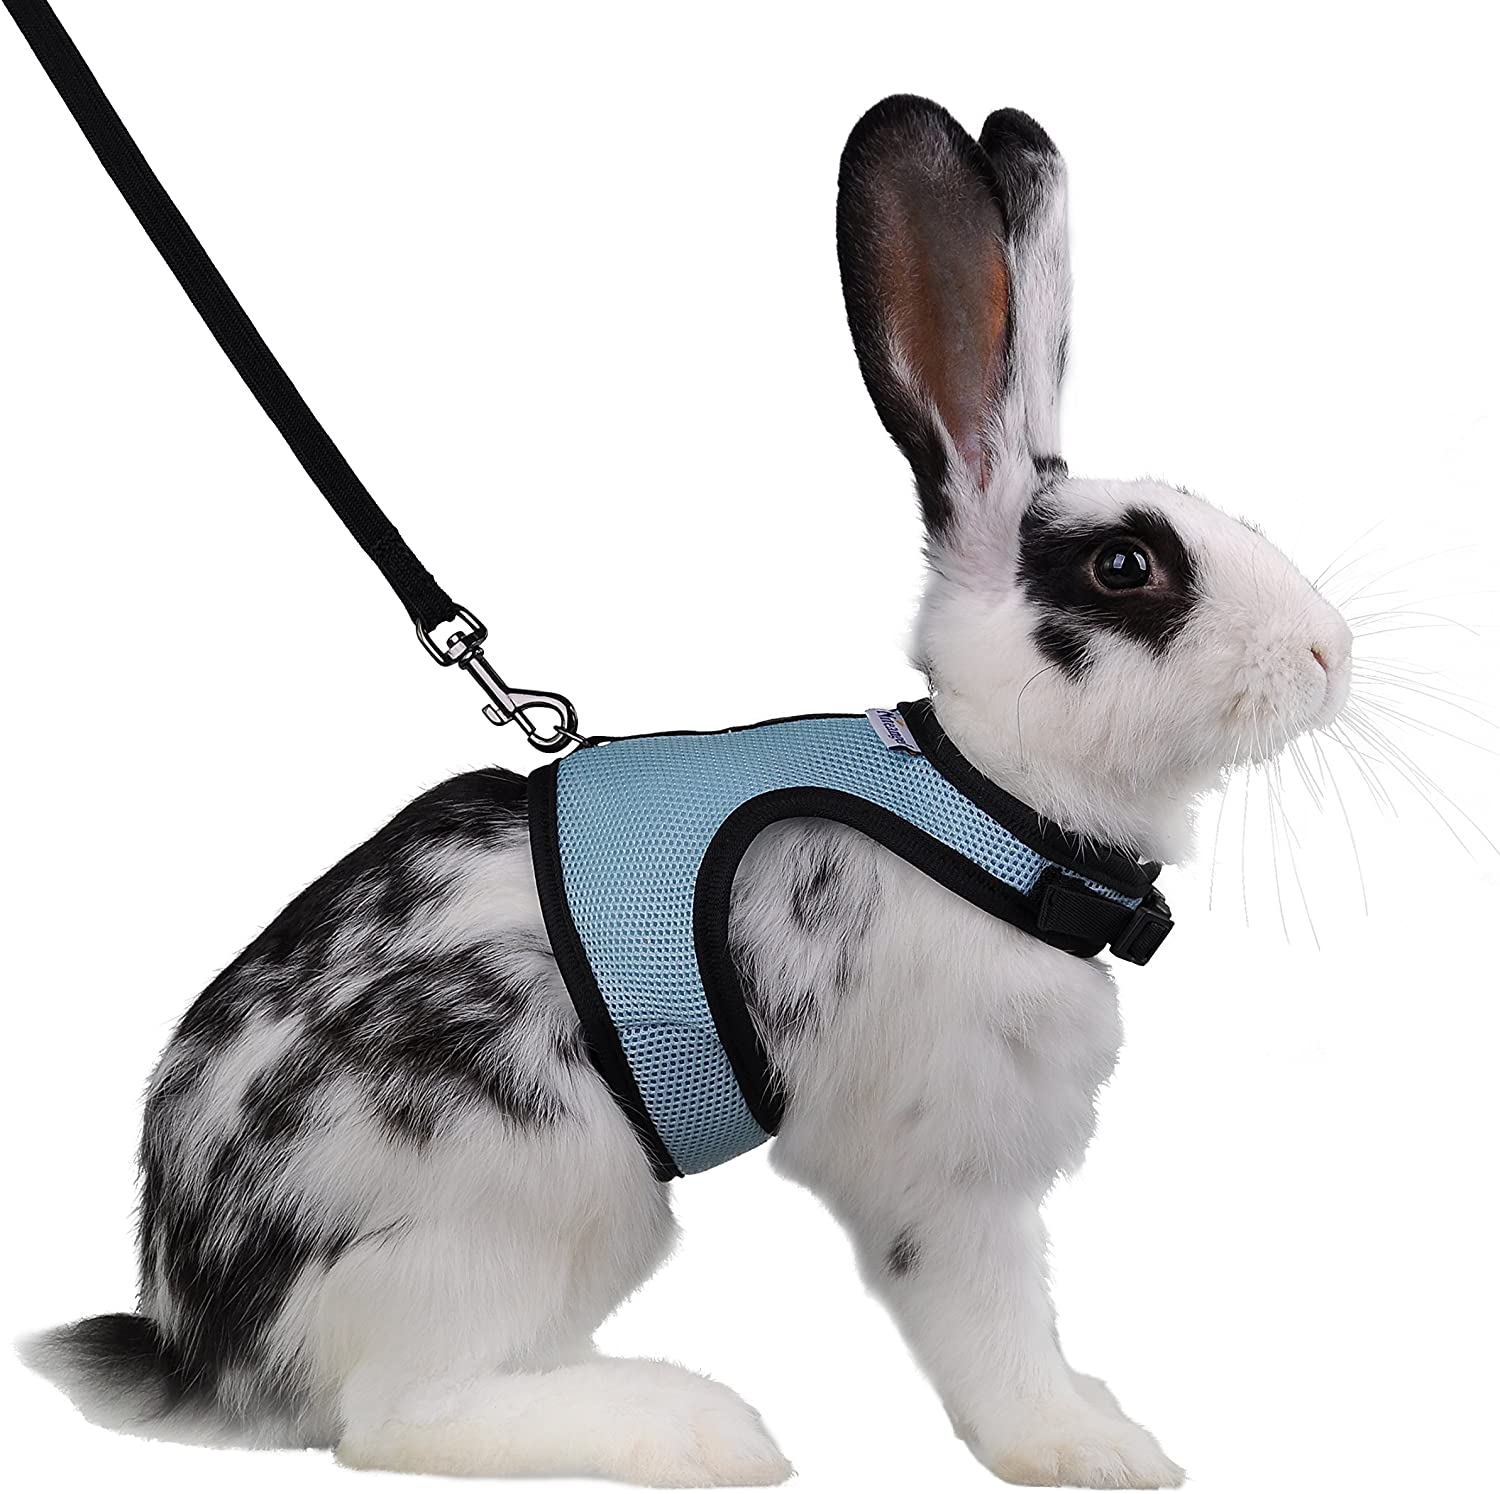 Black Adjustable Vest Long Leash Set with Safety Bell Soft Paded Breathable Mesh Harness for Cat Kitten Bunny Puppy Guinea Pig Small Pets Walking VavoPaw Rabbit Harness Vest XS Size 